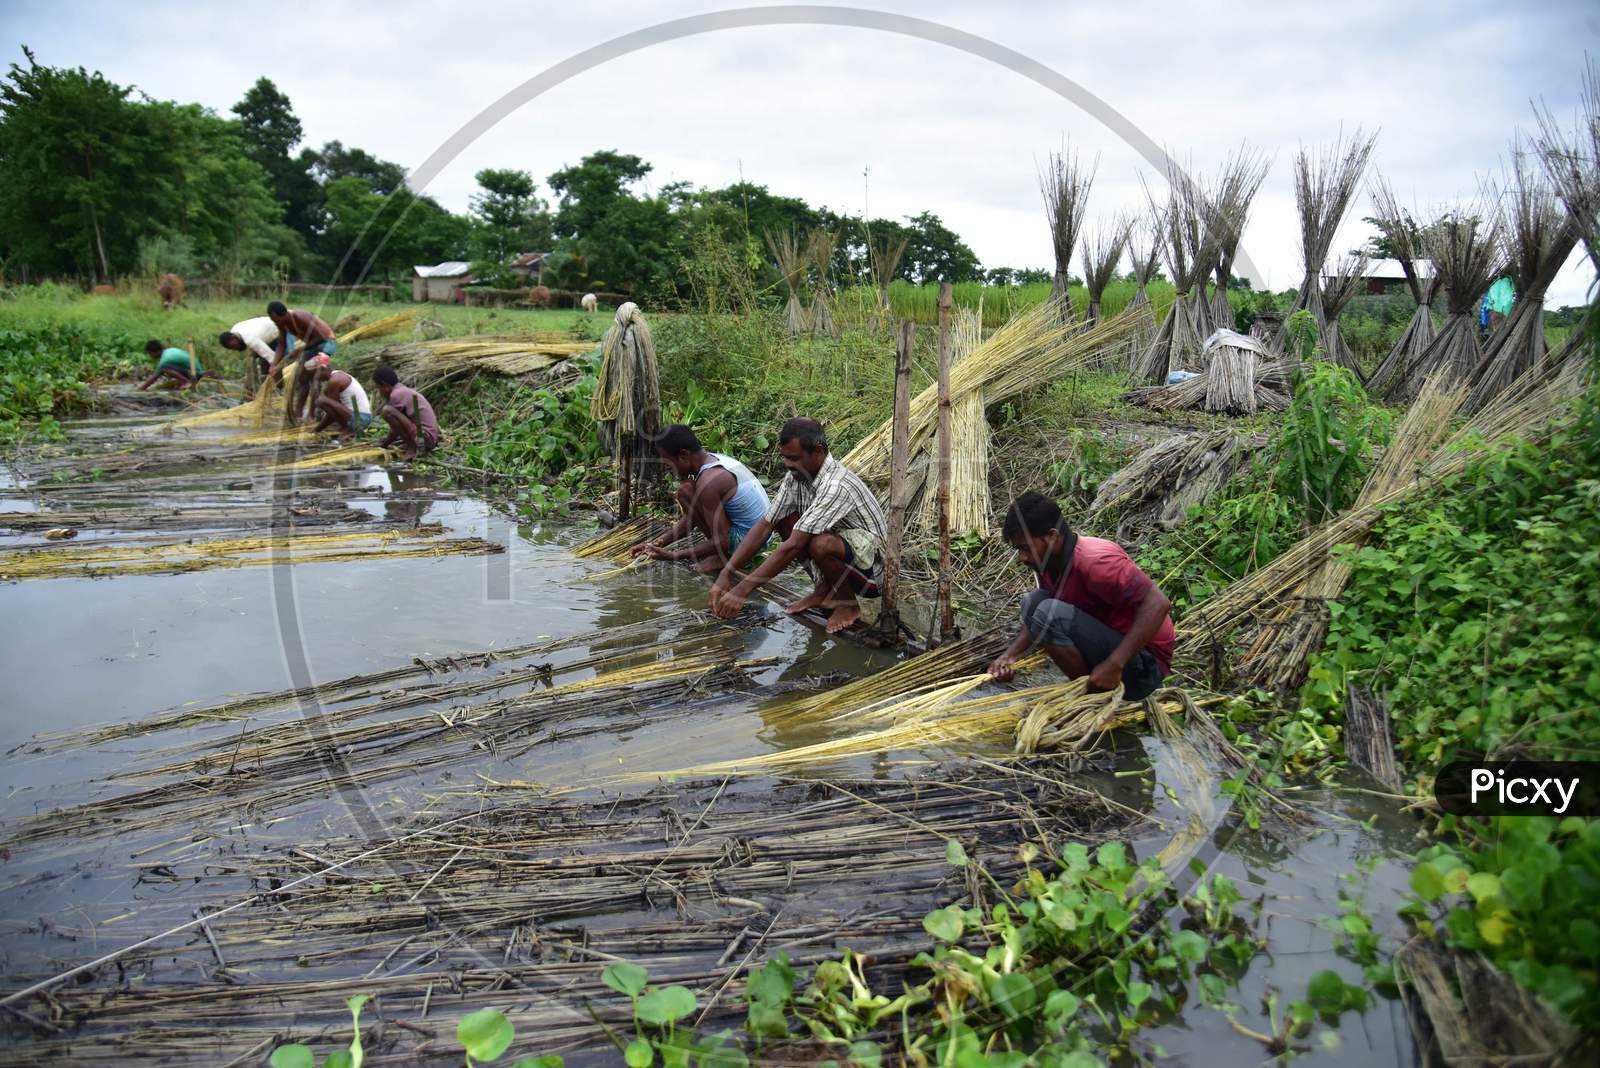 Farmers Extract Jute Fibers Near A Water Body In A Village In Nagaon District Of Assam On Sept 26,2020.